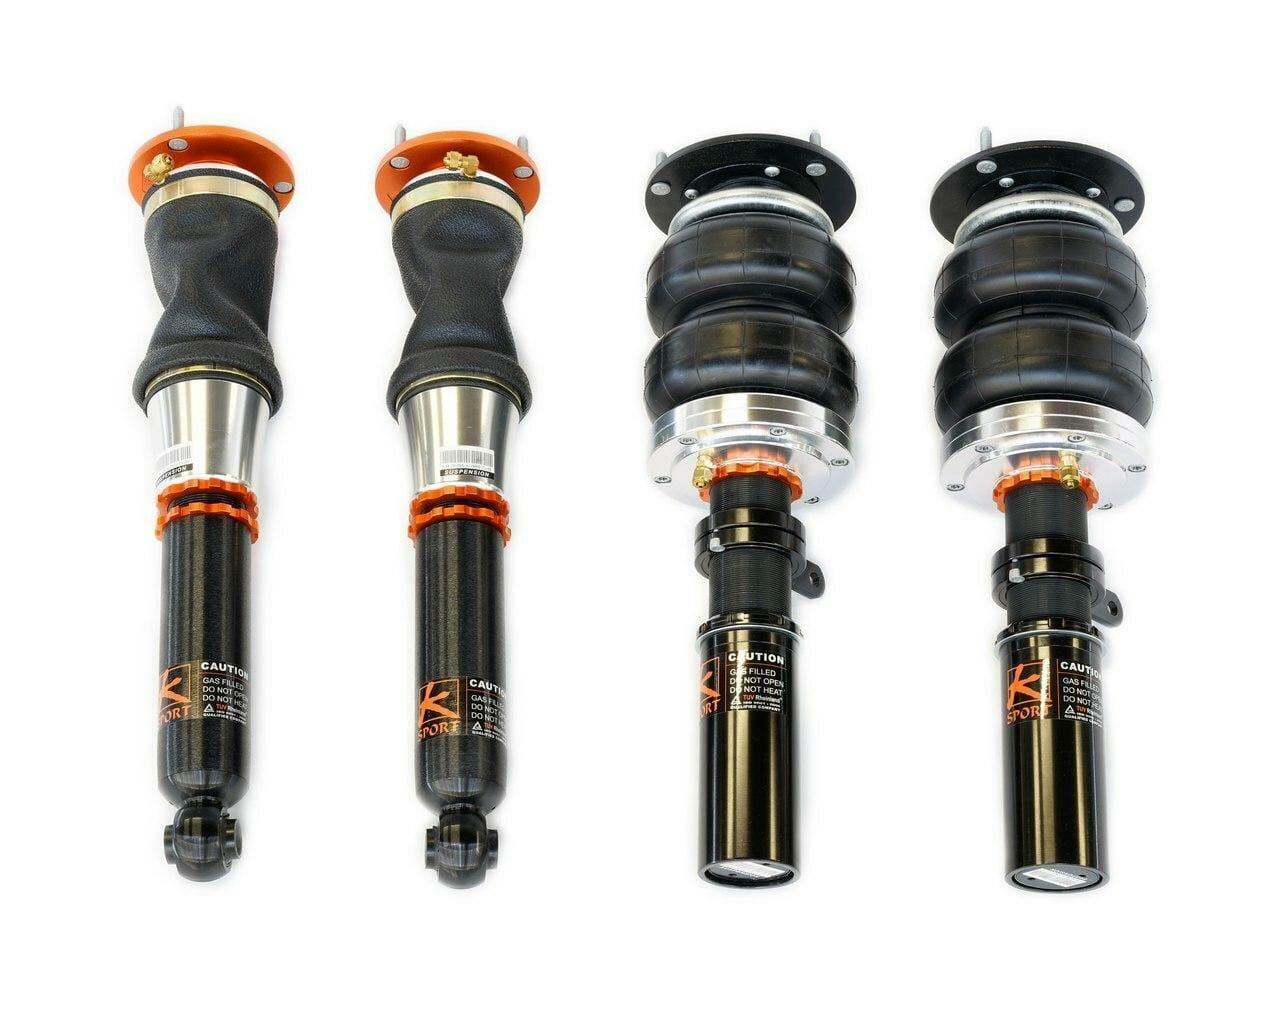 Ksport Airtech Air Suspension System Struts Only - 1995-2001 Mercedes-Benz E-Class 320 Excl 4MATIC, Excl AIRMATIC W210 CMD010-ASO-01